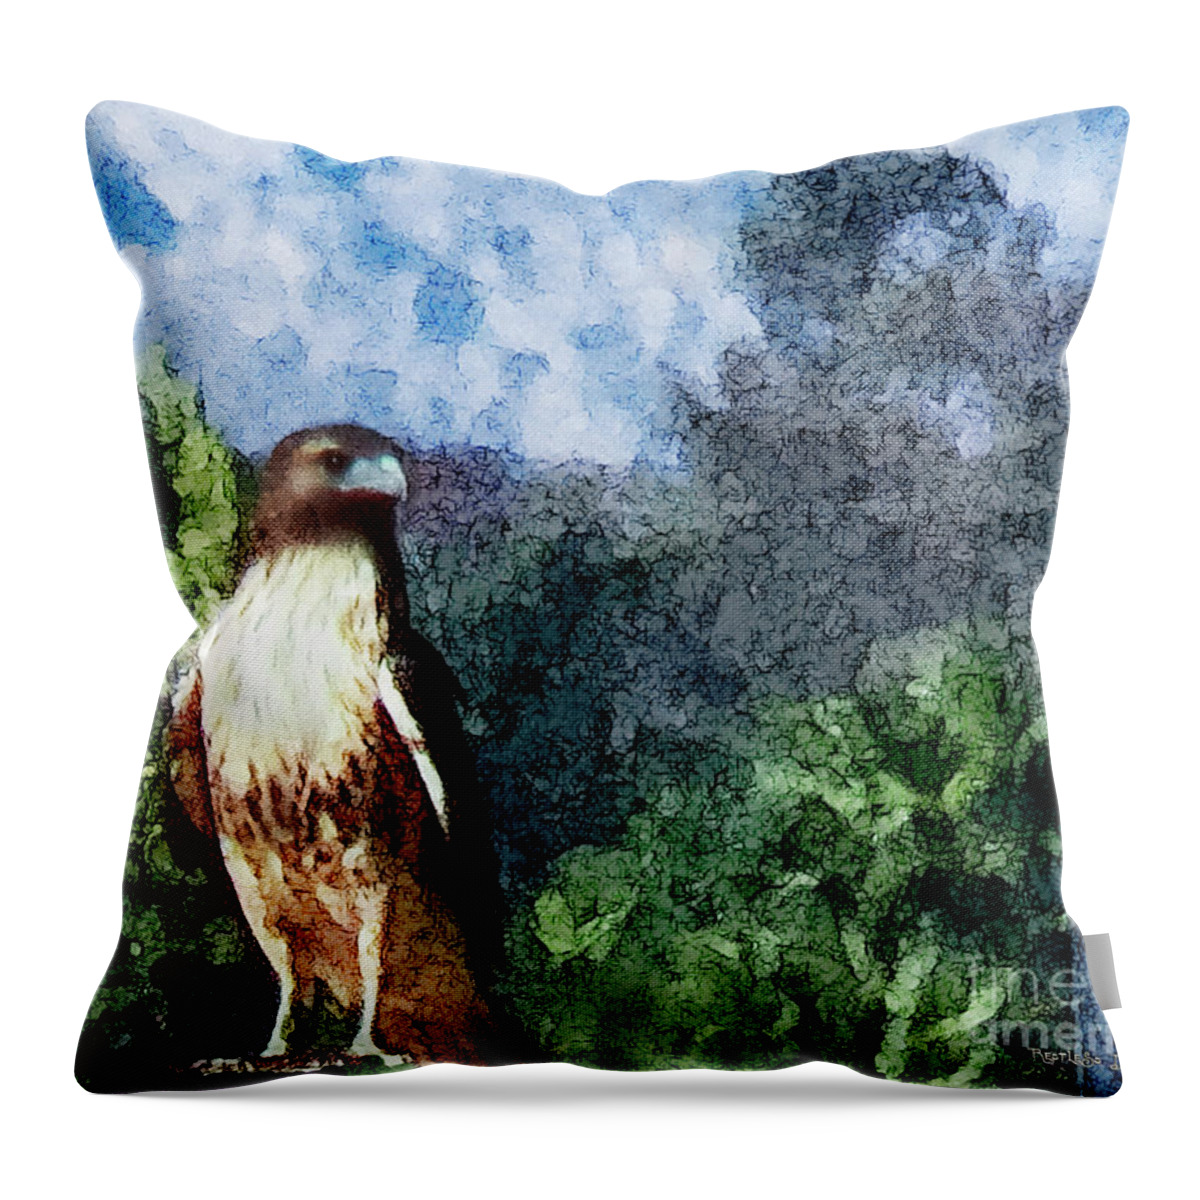 Falcon Throw Pillow featuring the photograph Menifee Falcon by Rhonda Strickland